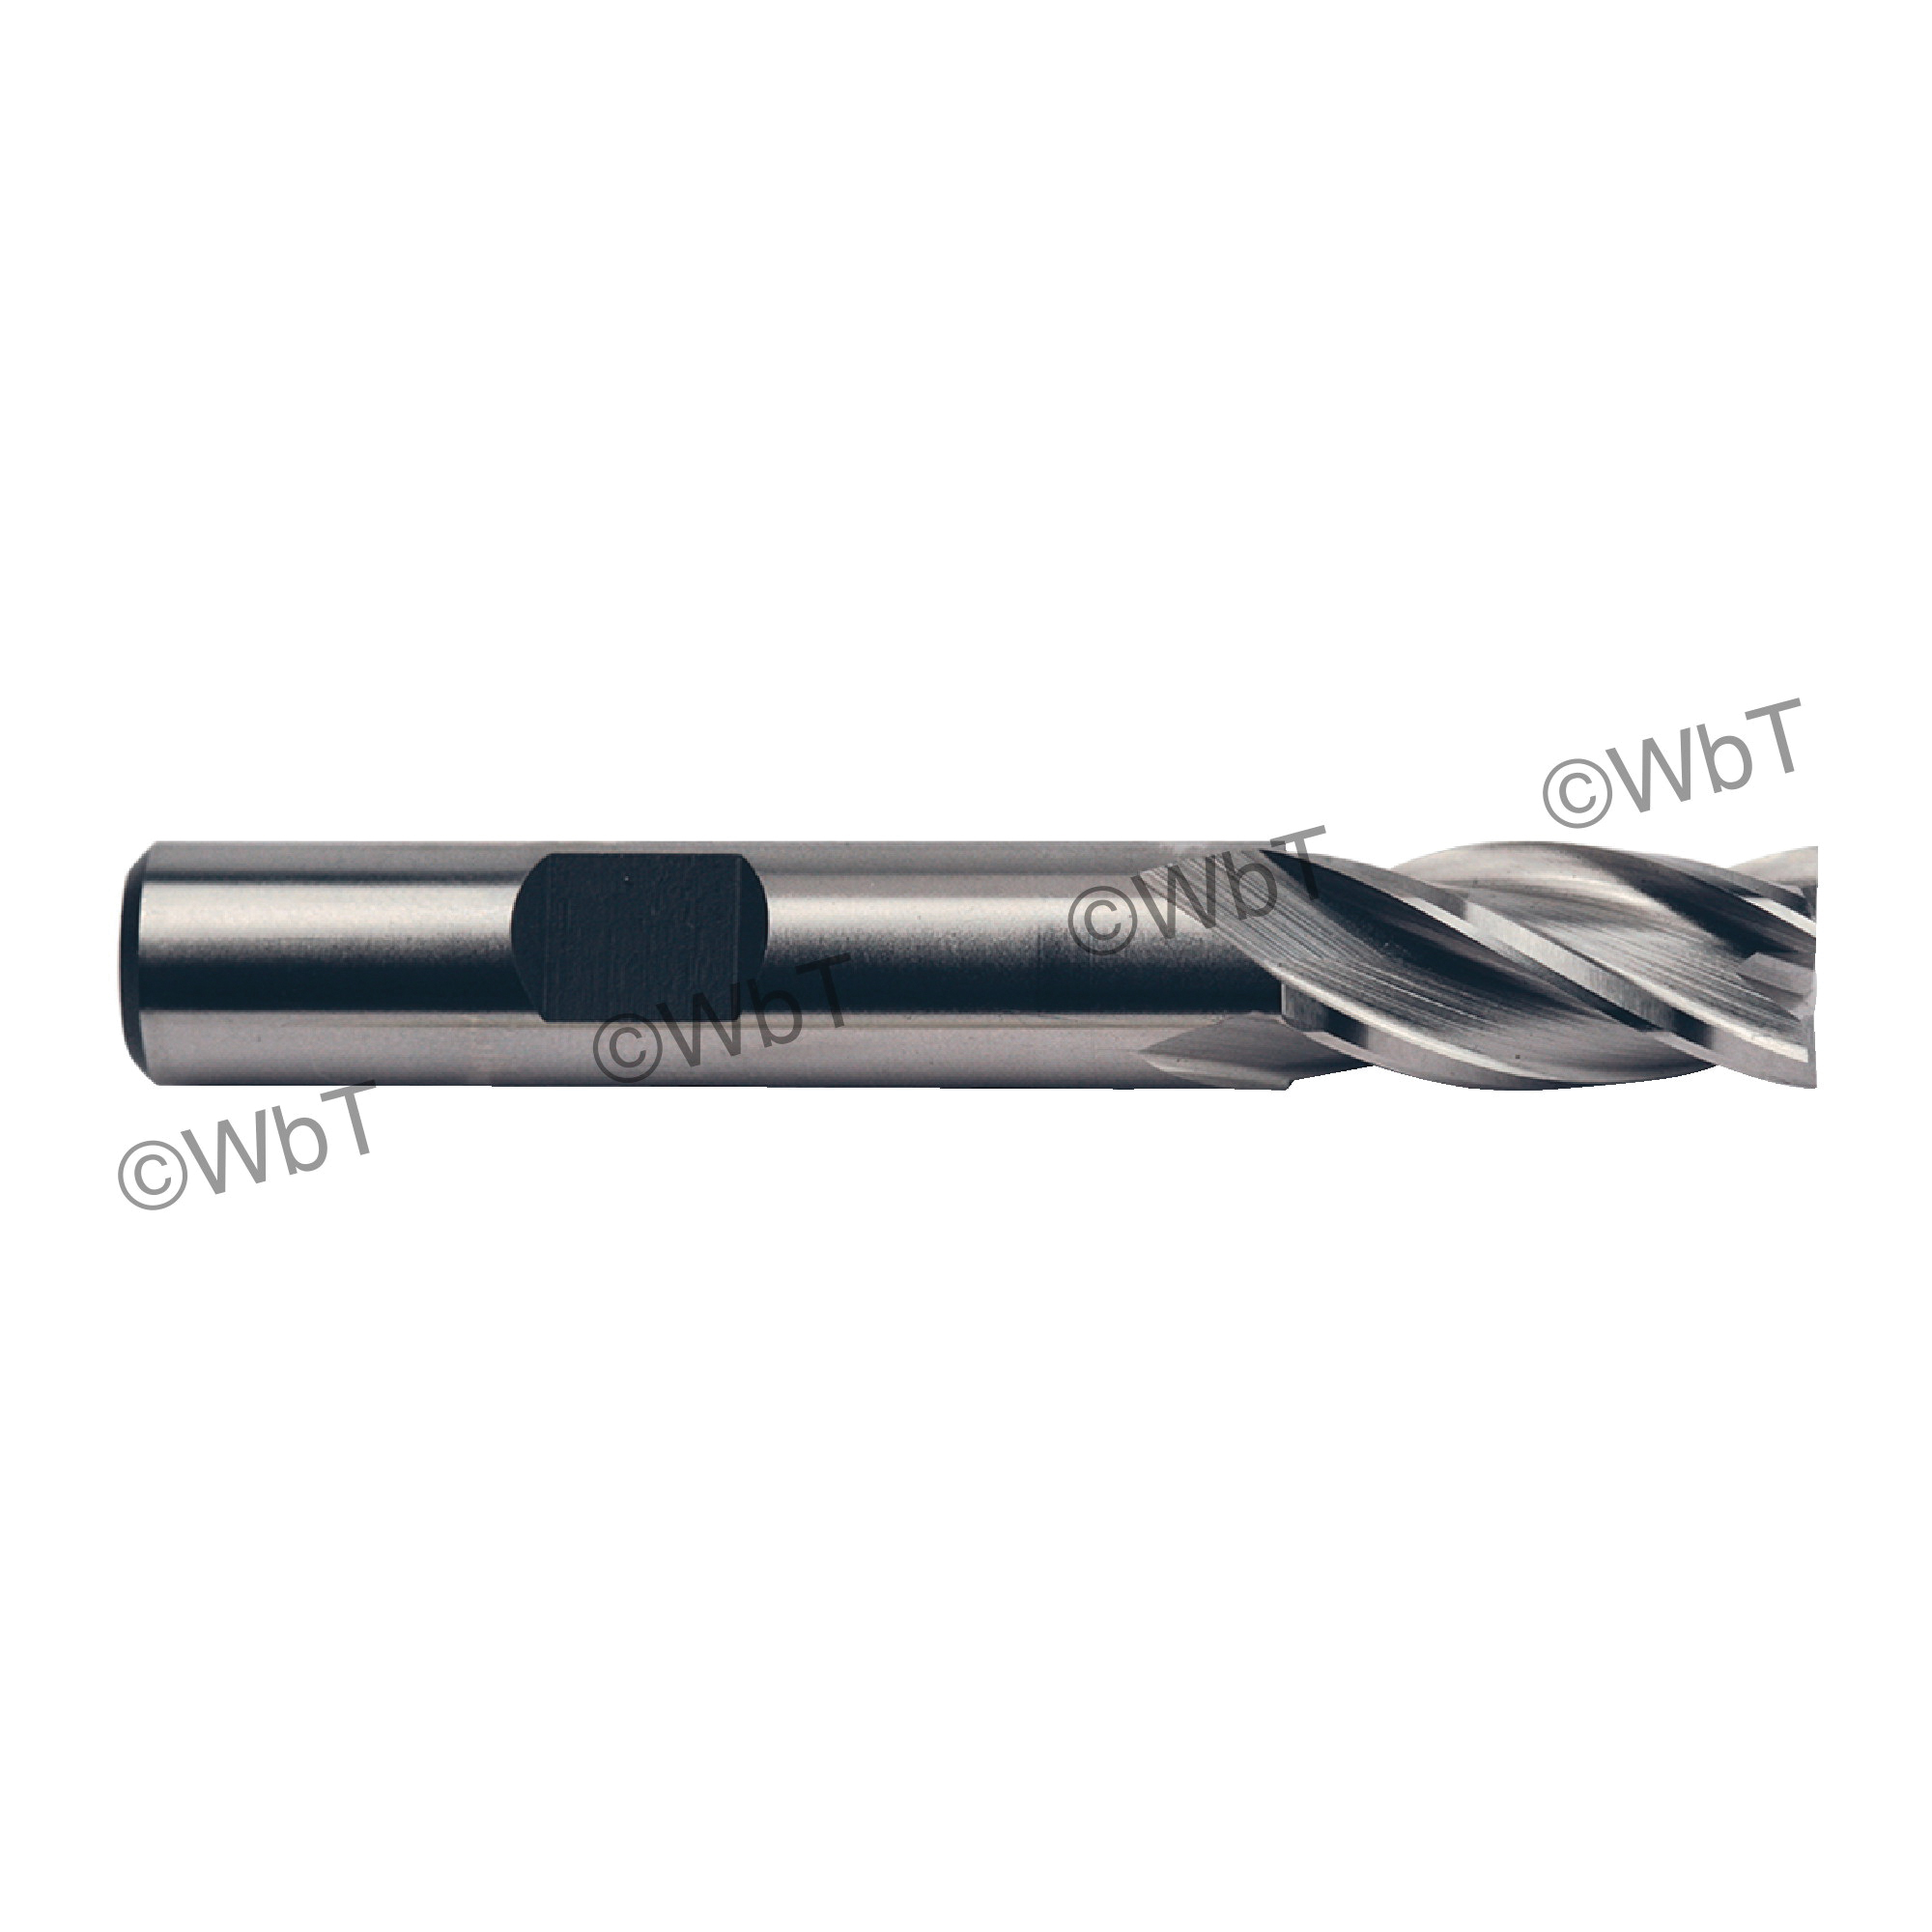 TTC 08-015-060 D5 Center Cutting Standard Length Single End Mill, 1/4 in Dia Cutter, 5/8 in Length of Cut, 4 Flutes, 3/8 in Dia Shank, 2-7/16 in OAL, Bright